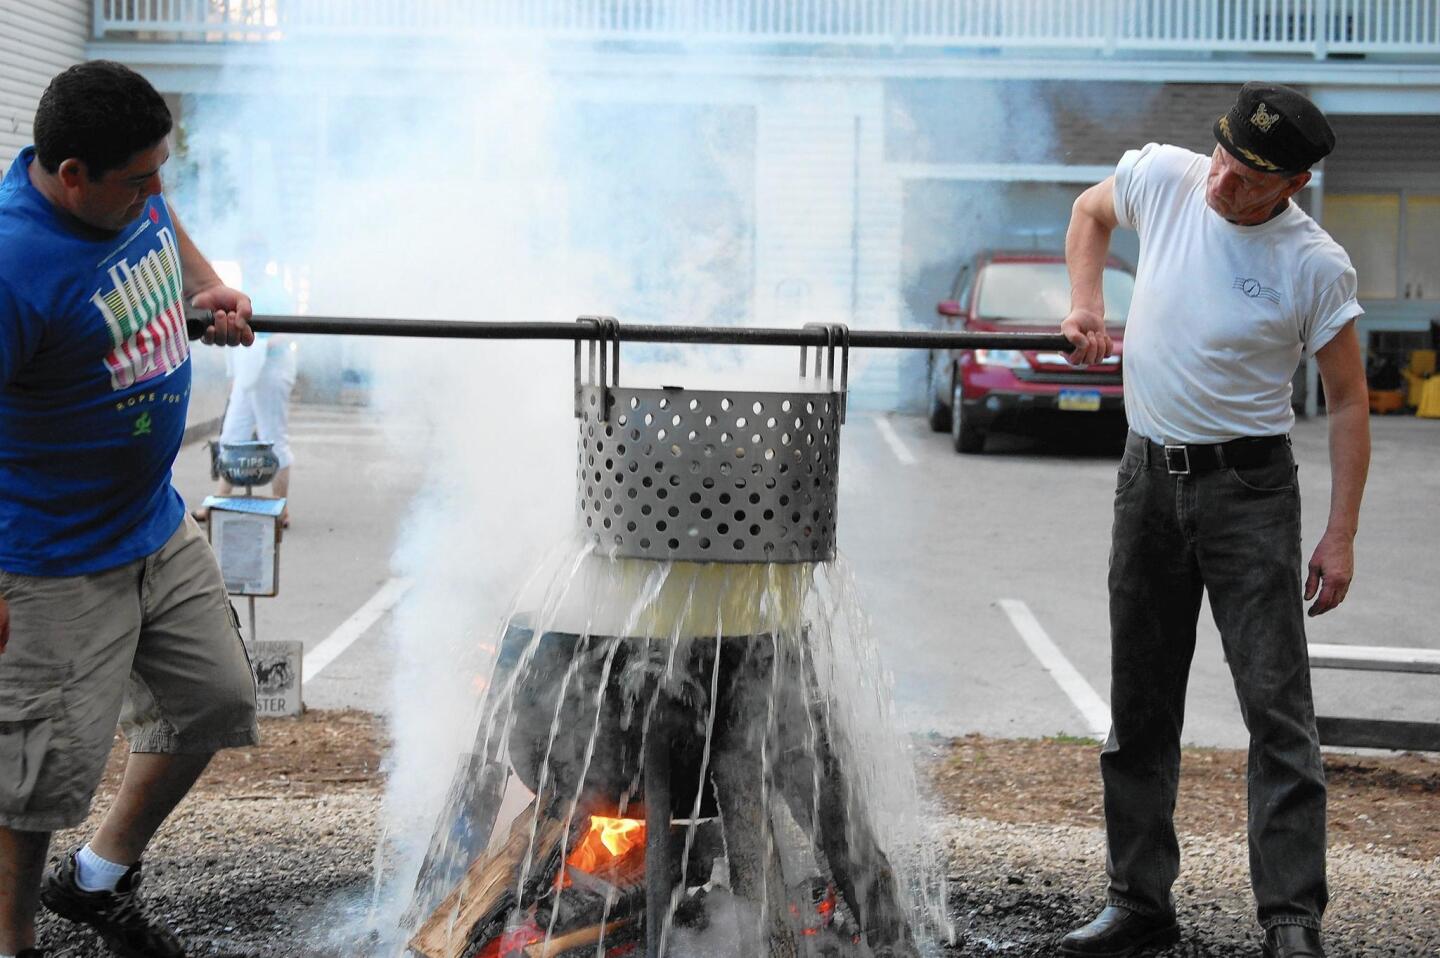 Watching a traditional fish boil is half the fun, and the spectacle can be found throughout Door County, including the Old Post Office Restaurant in Ephraim, Wis.